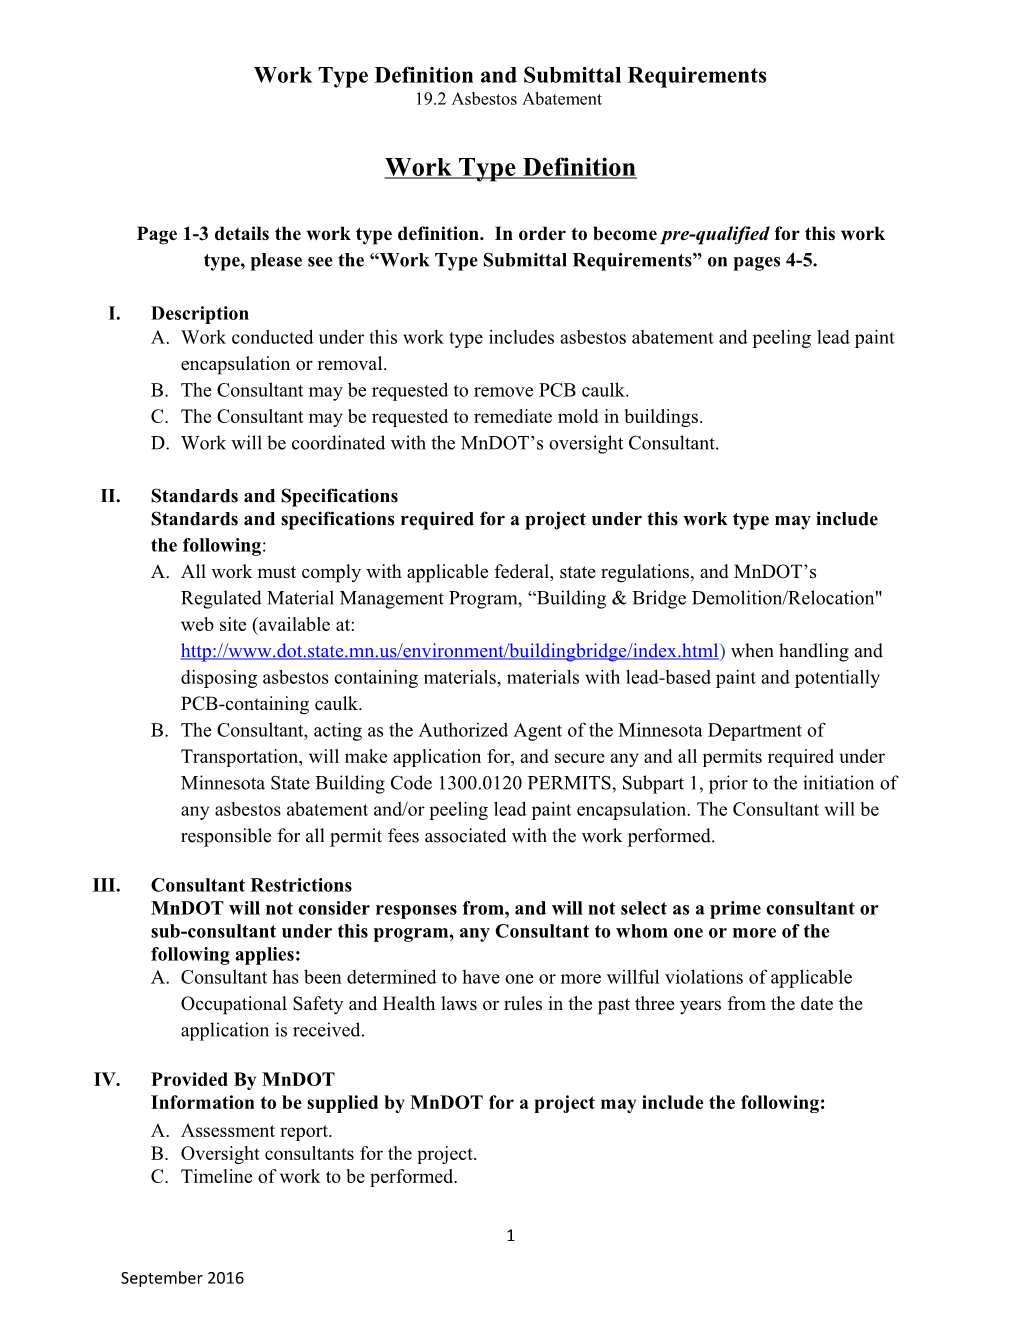 Work Type Definition and Submittal Requirements